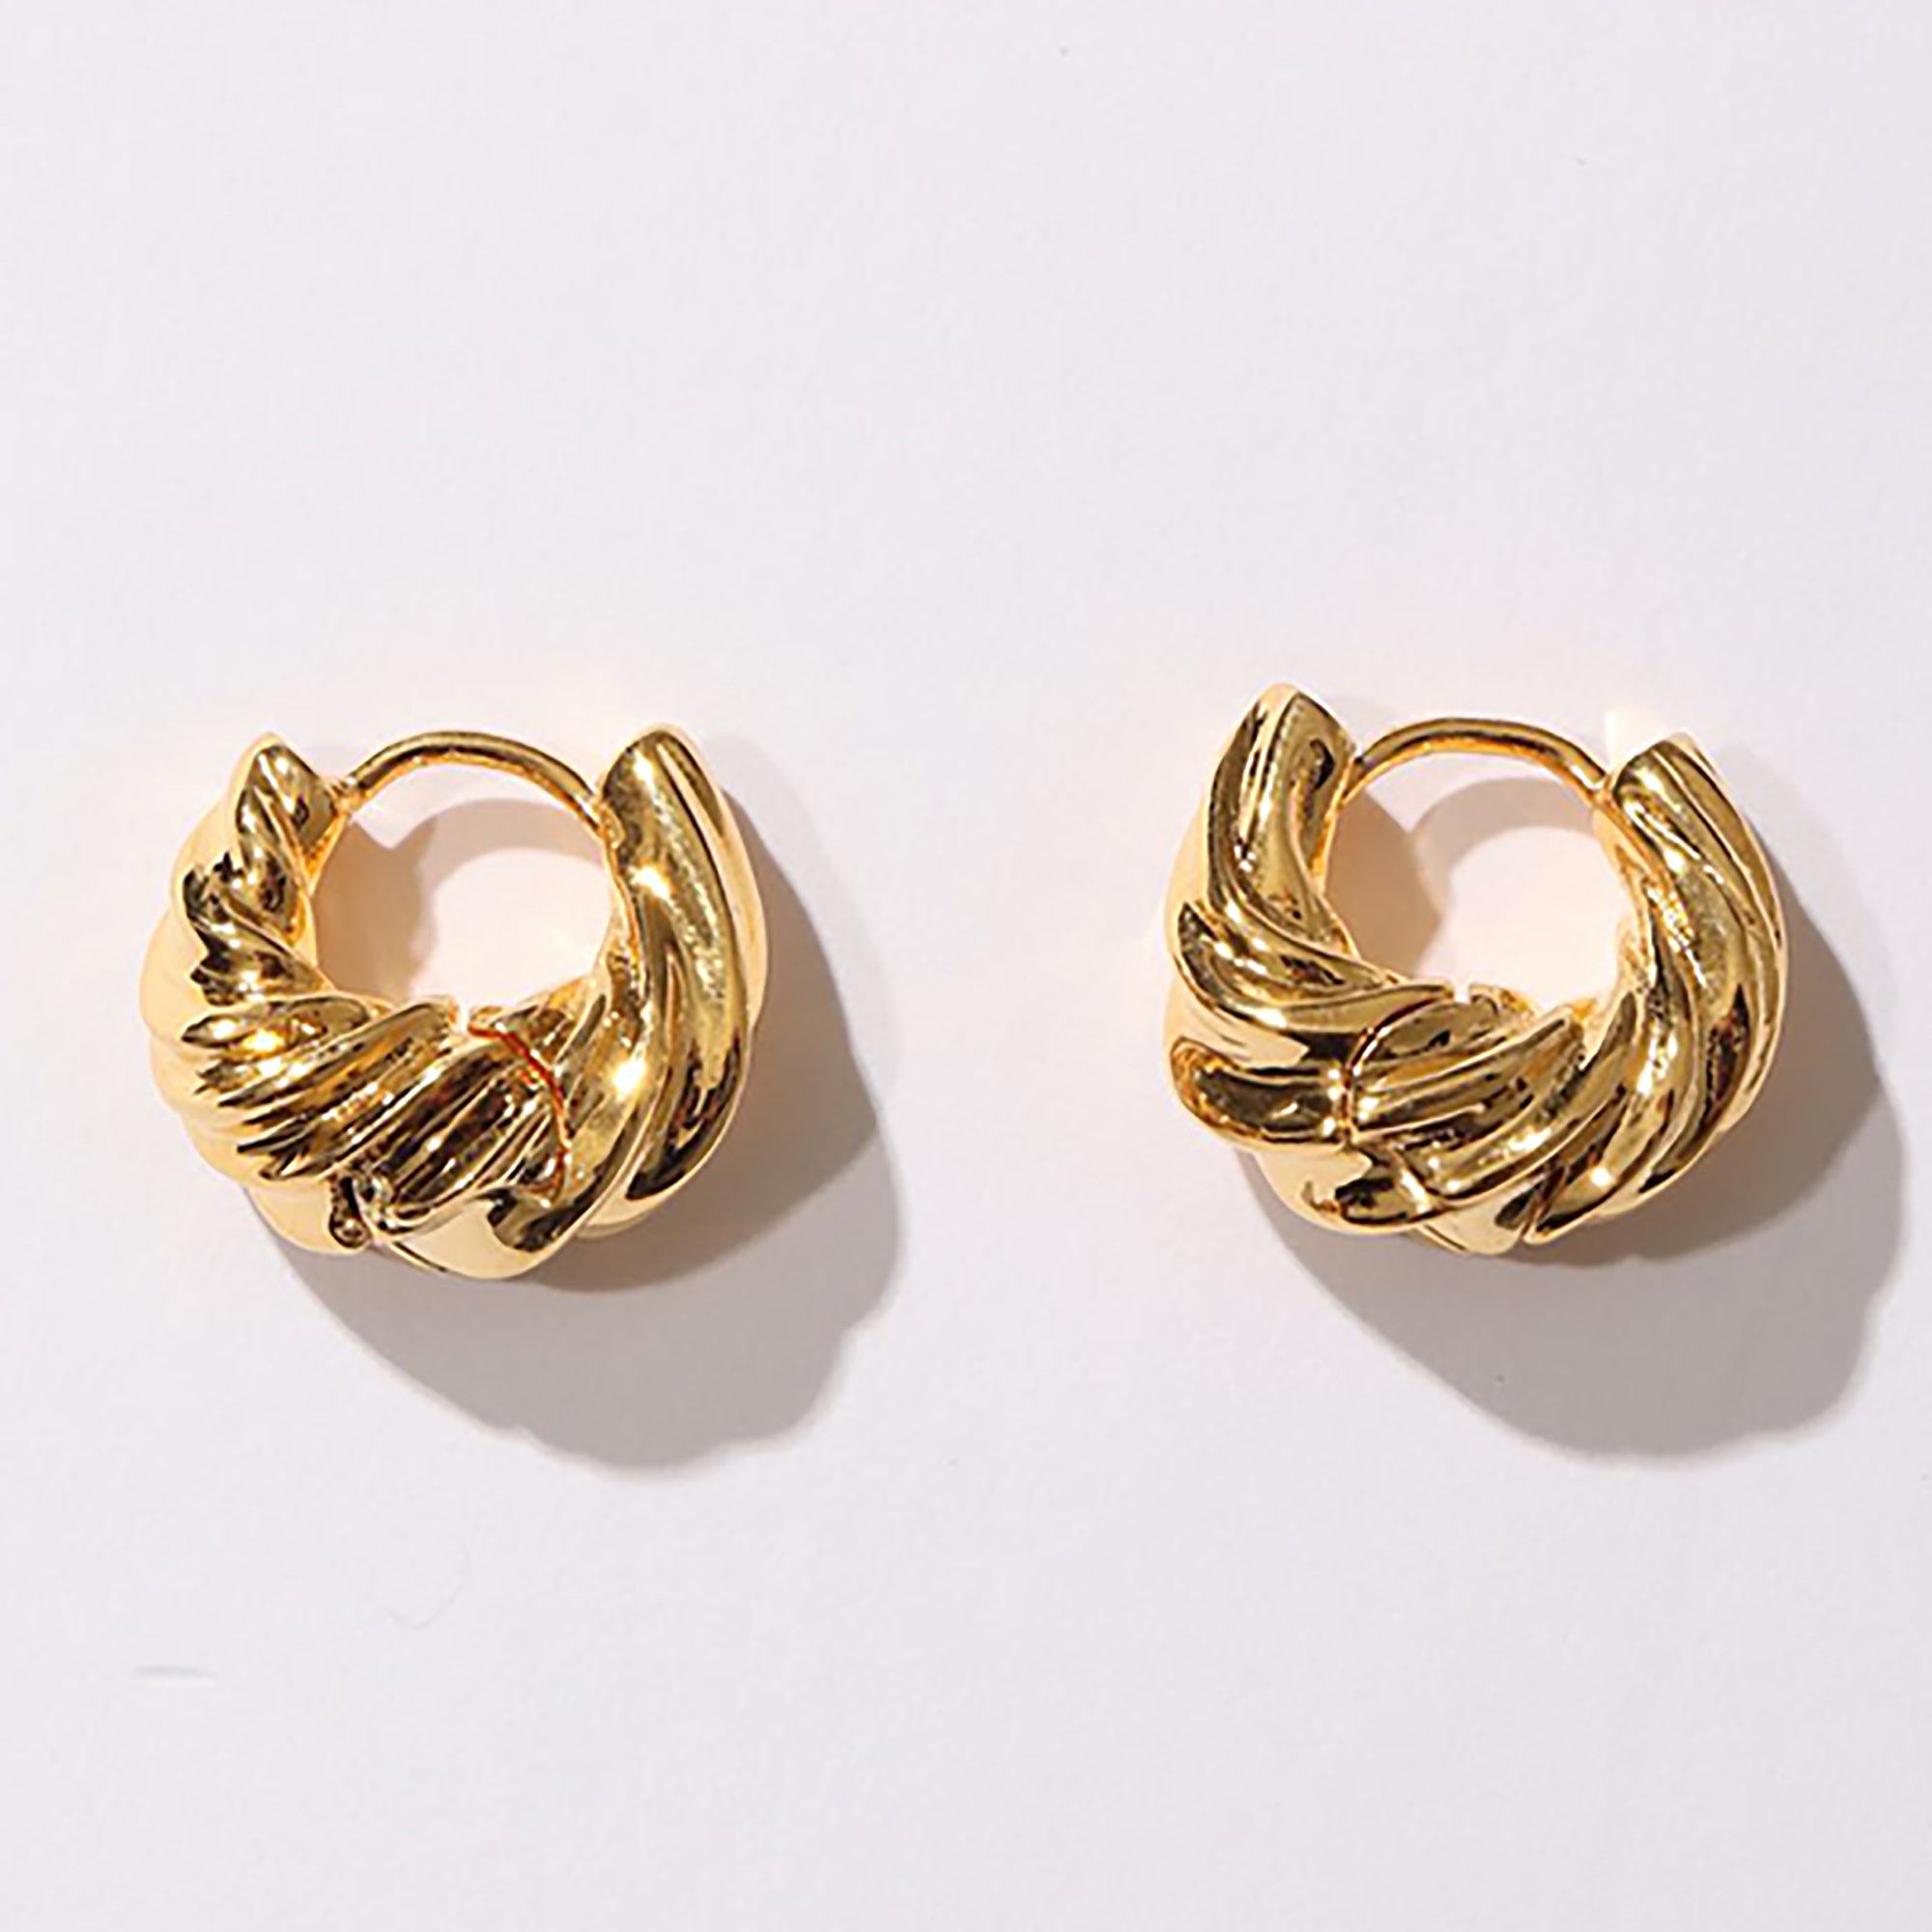 Gold Plated Hoop Earrings Gift wedding influencer styling KOL / Youtuber / Celebrity / Fashion Icon